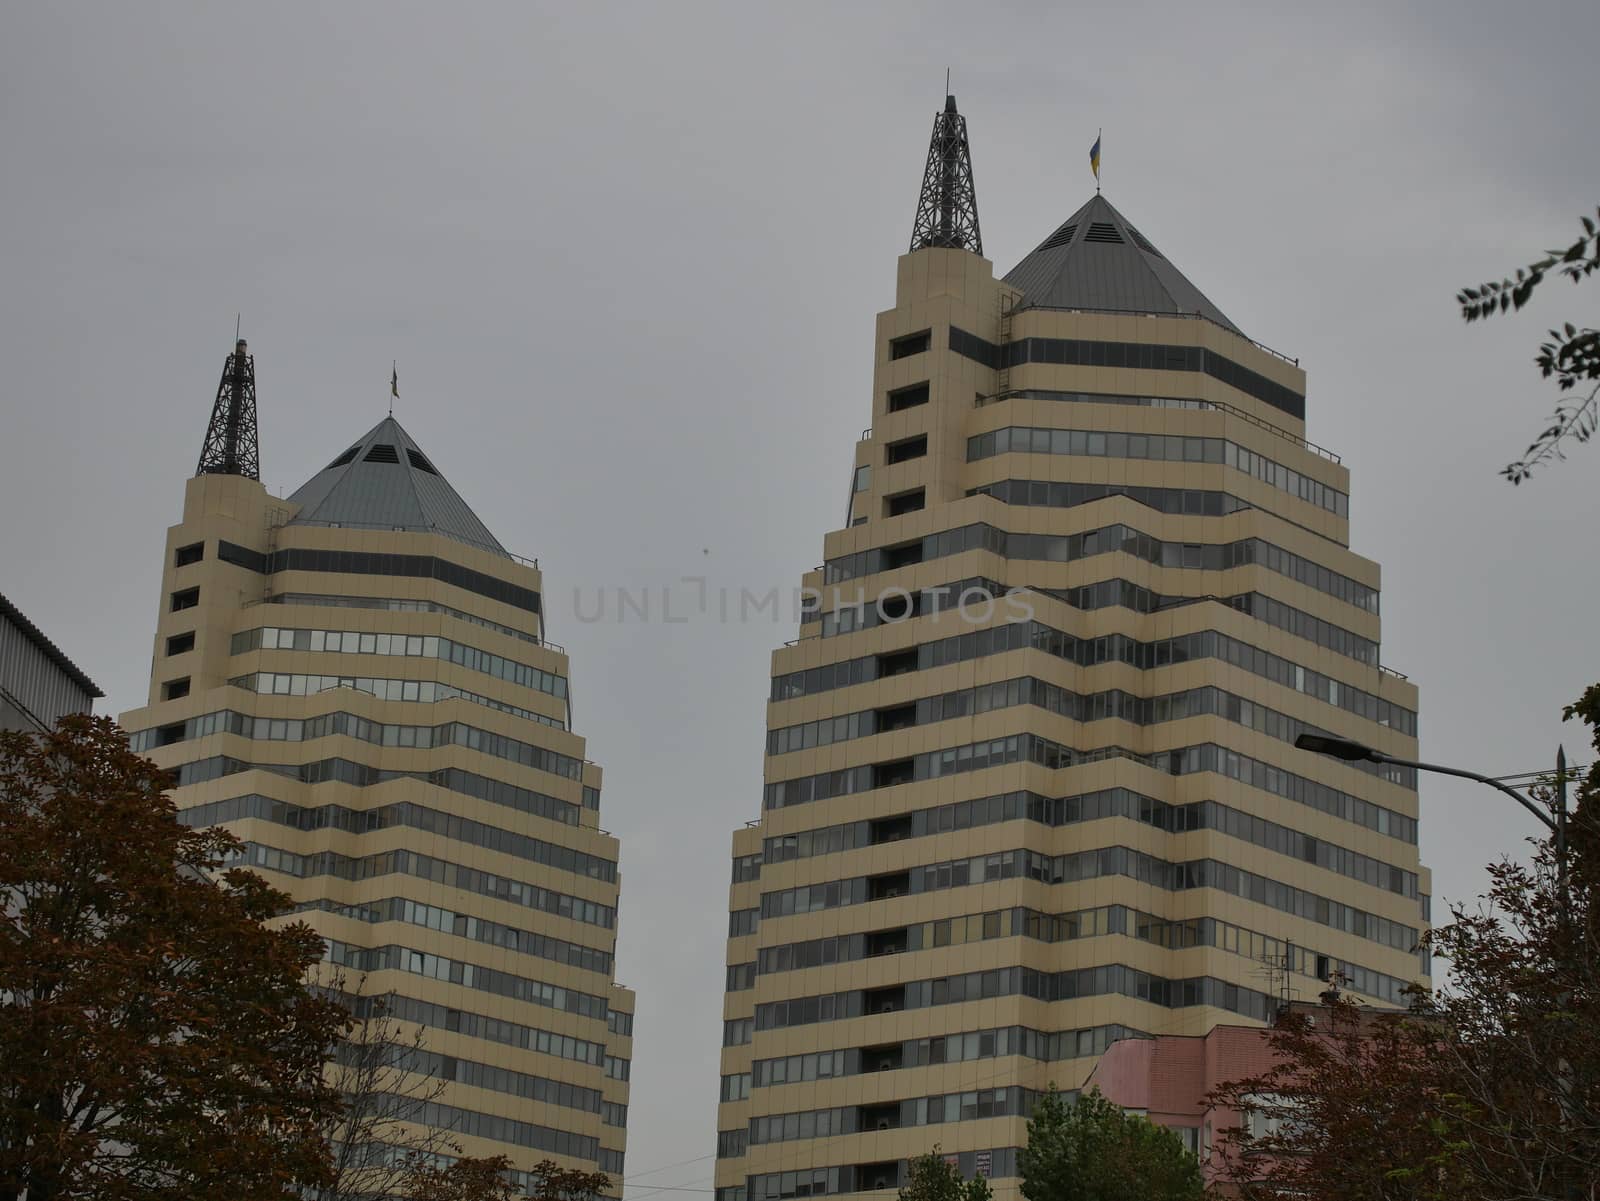 Dnipro, Ukraine - September 29, 2020: casual view on the streets architecture and building style at city center